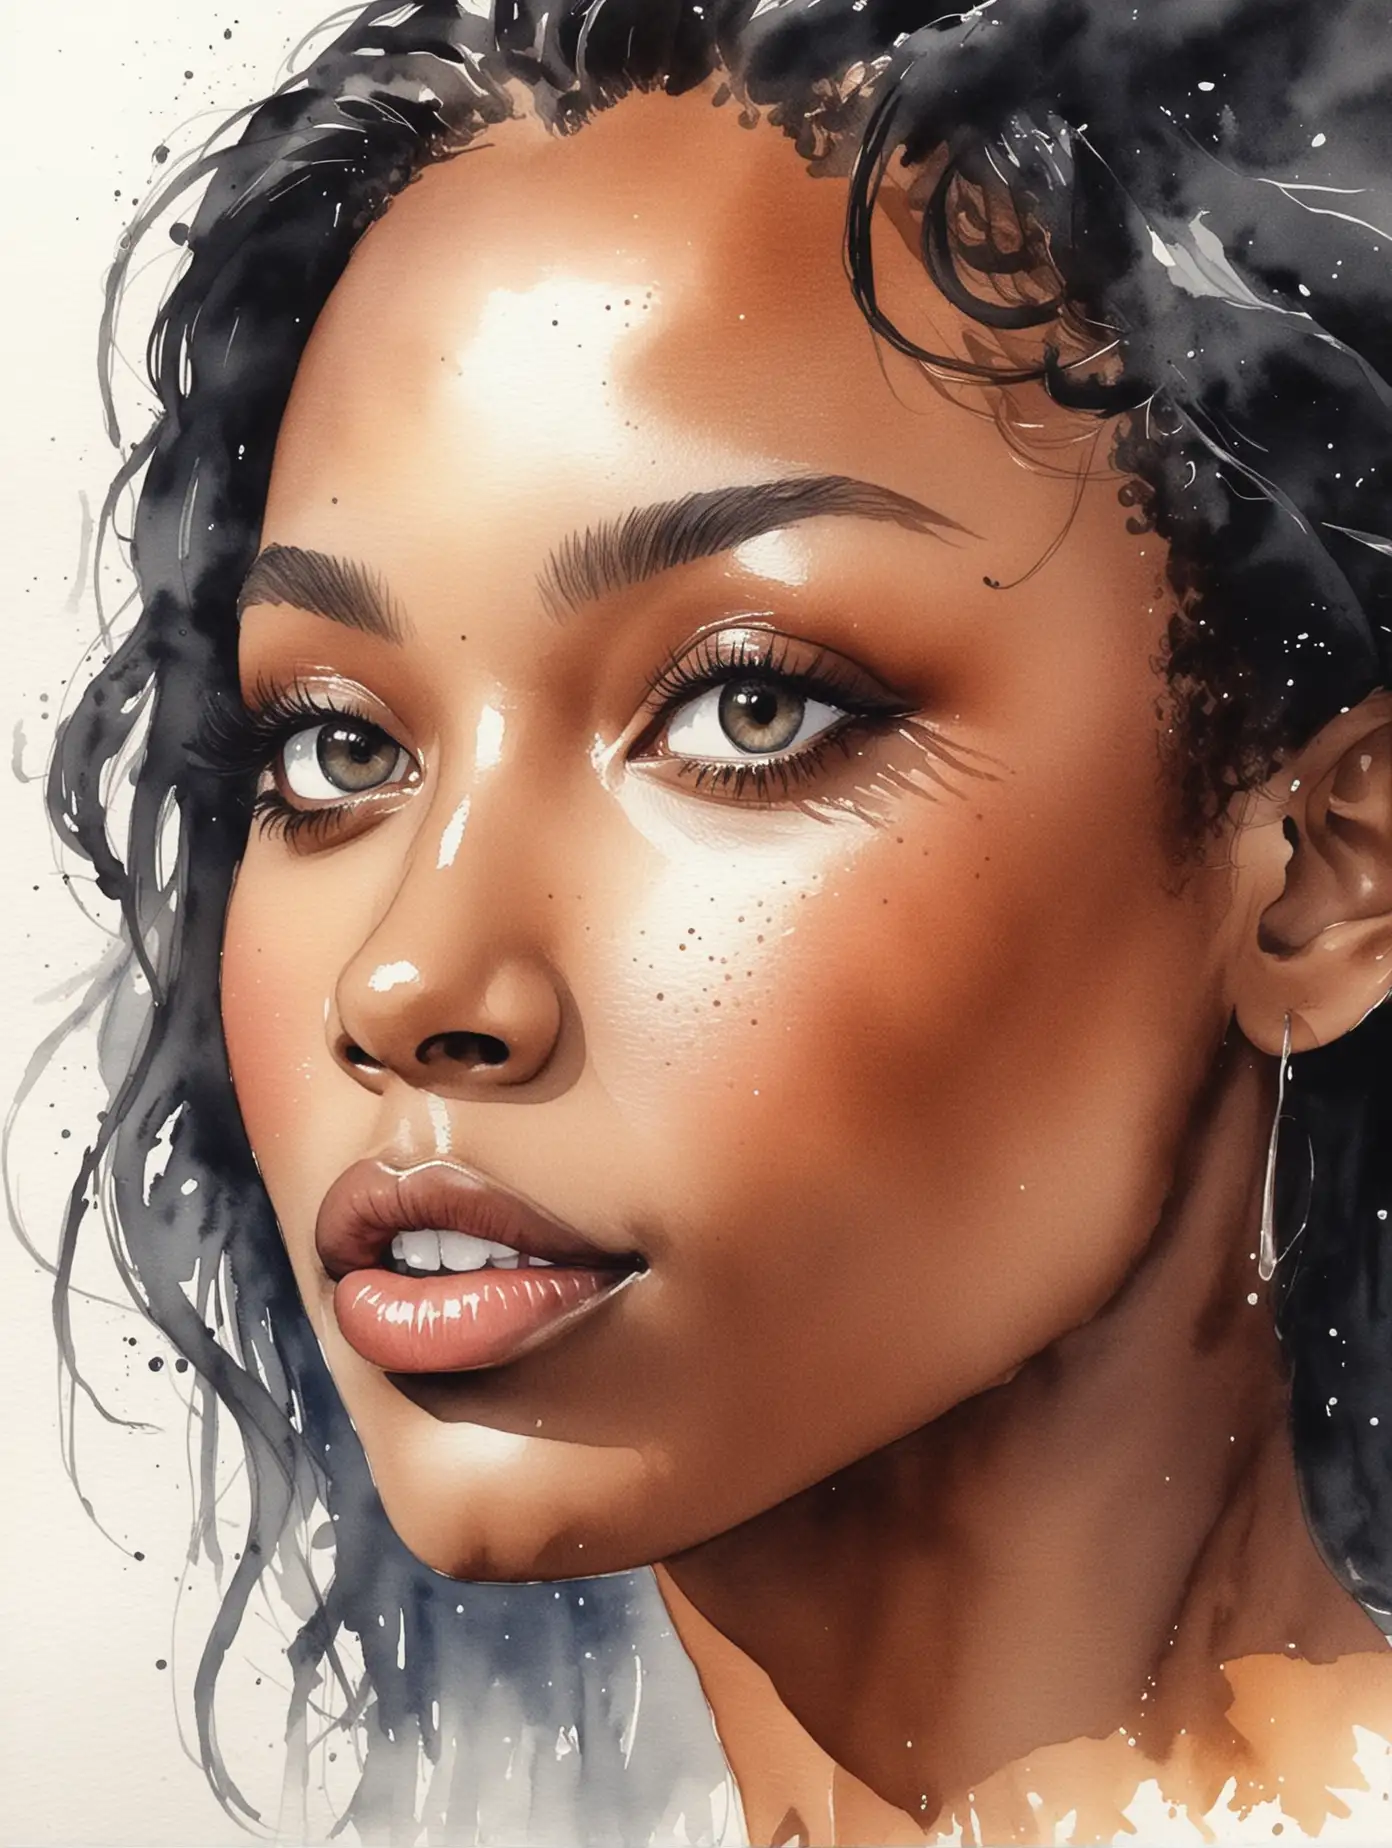 Ethereal Watercolor Portrait of a Stunning Black Woman